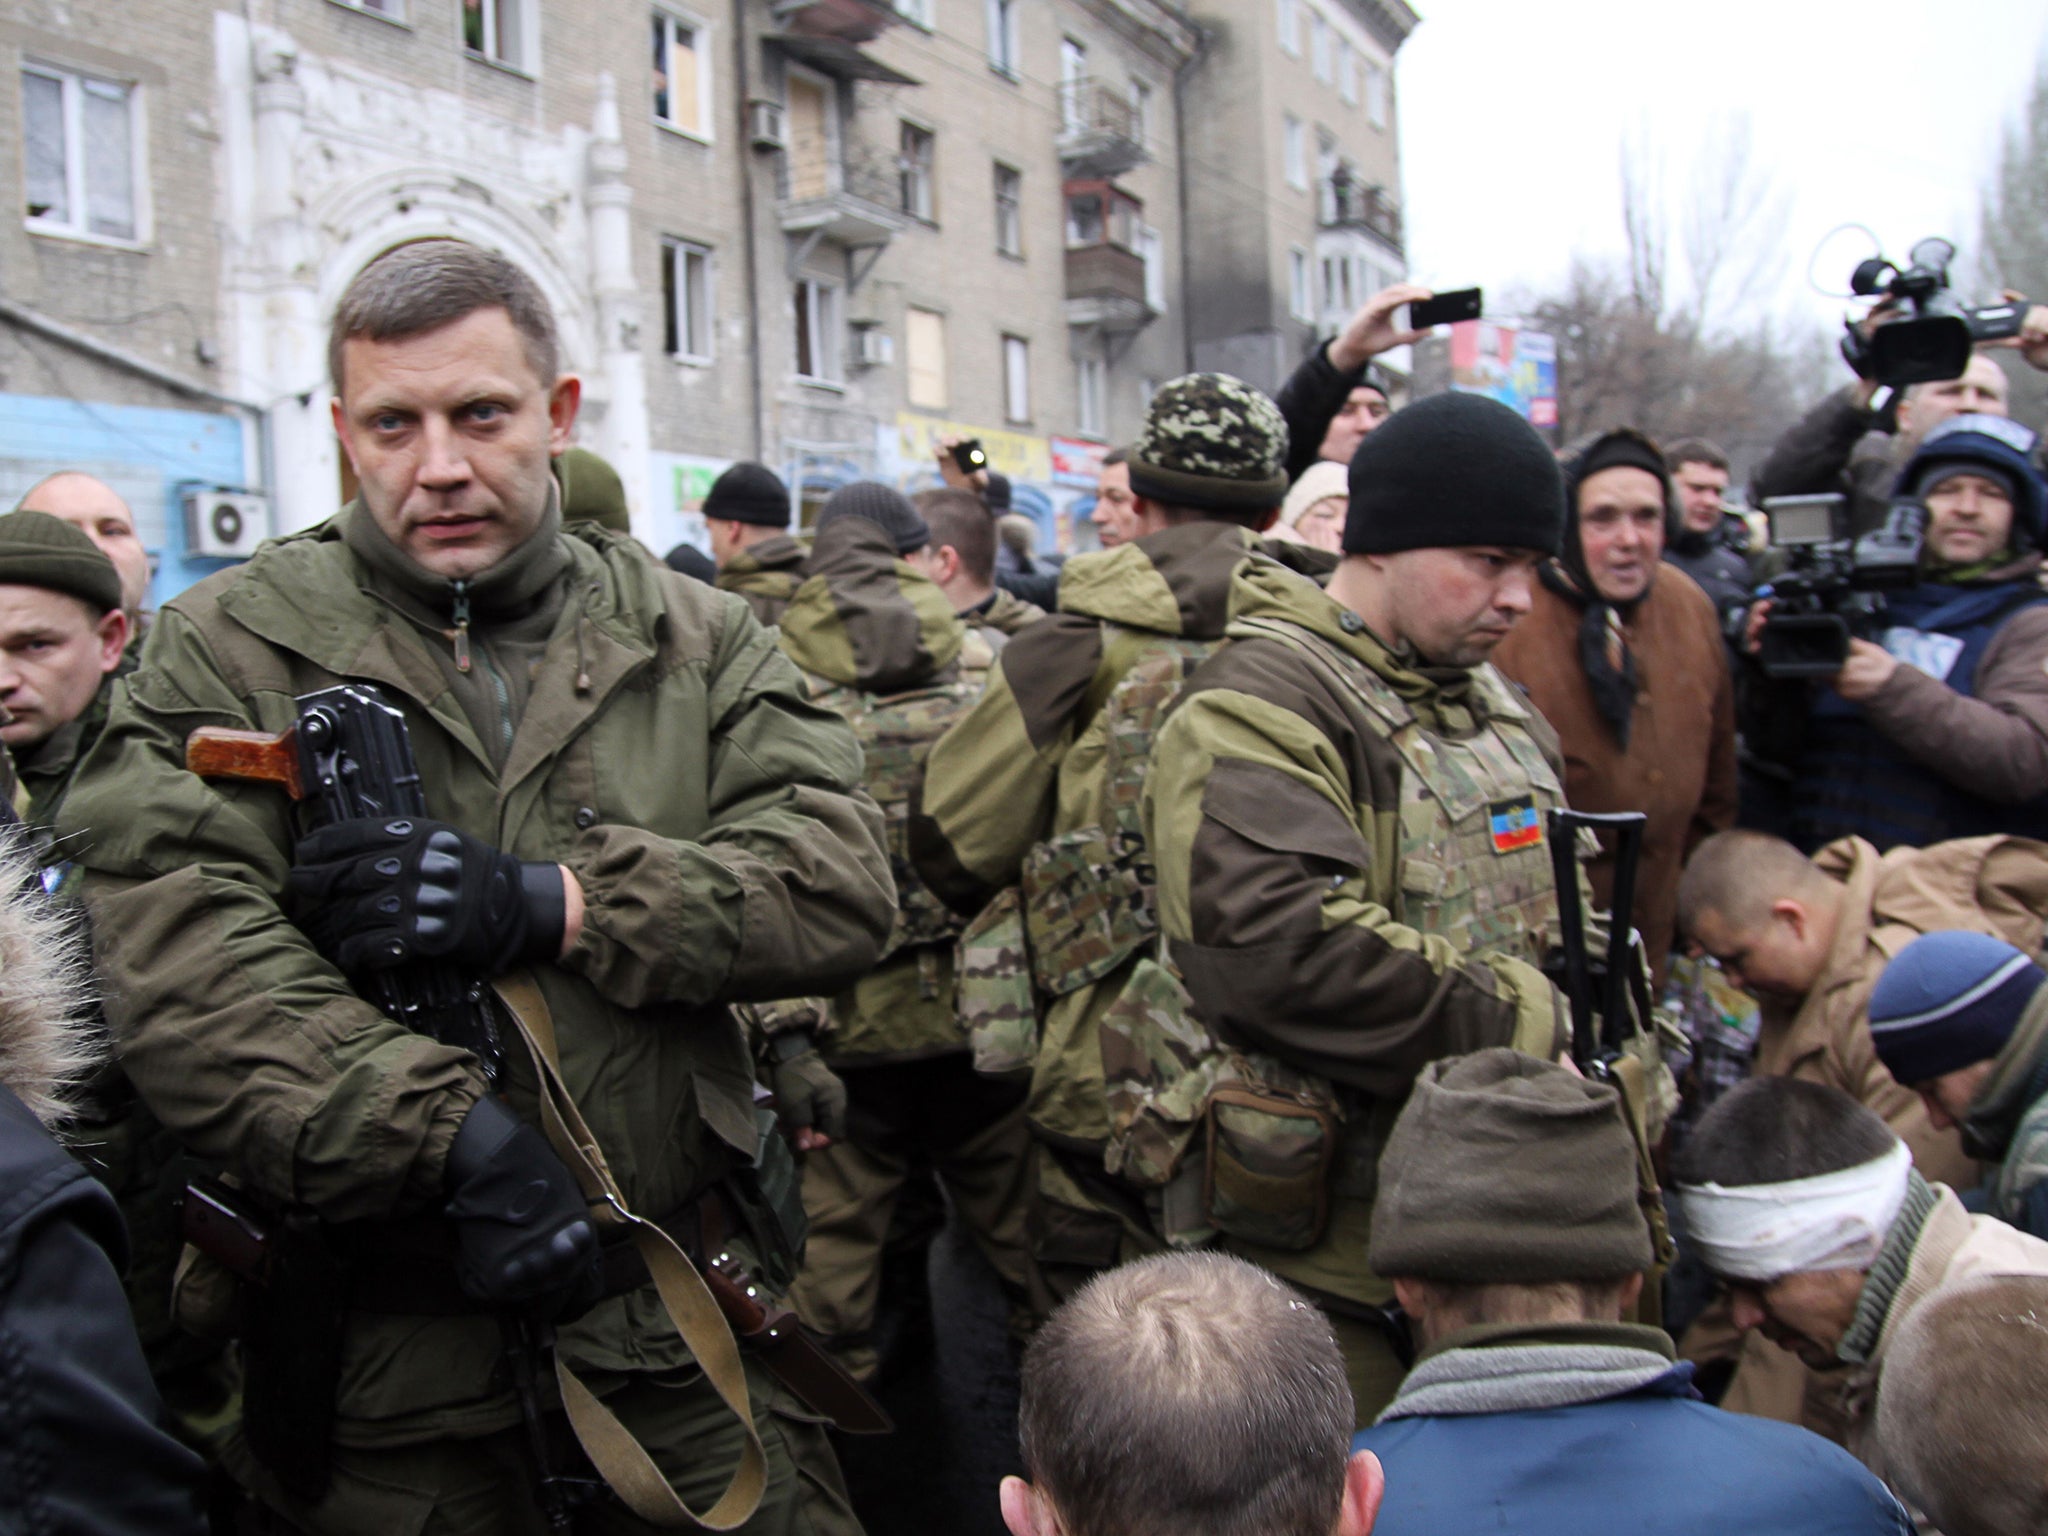 The leader of the self-declared Donetsk People’s Republic Alexander Zakharchenko (on left) next to kneeling captive Ukrainian soldiers at a bus stop where 13 people were killed